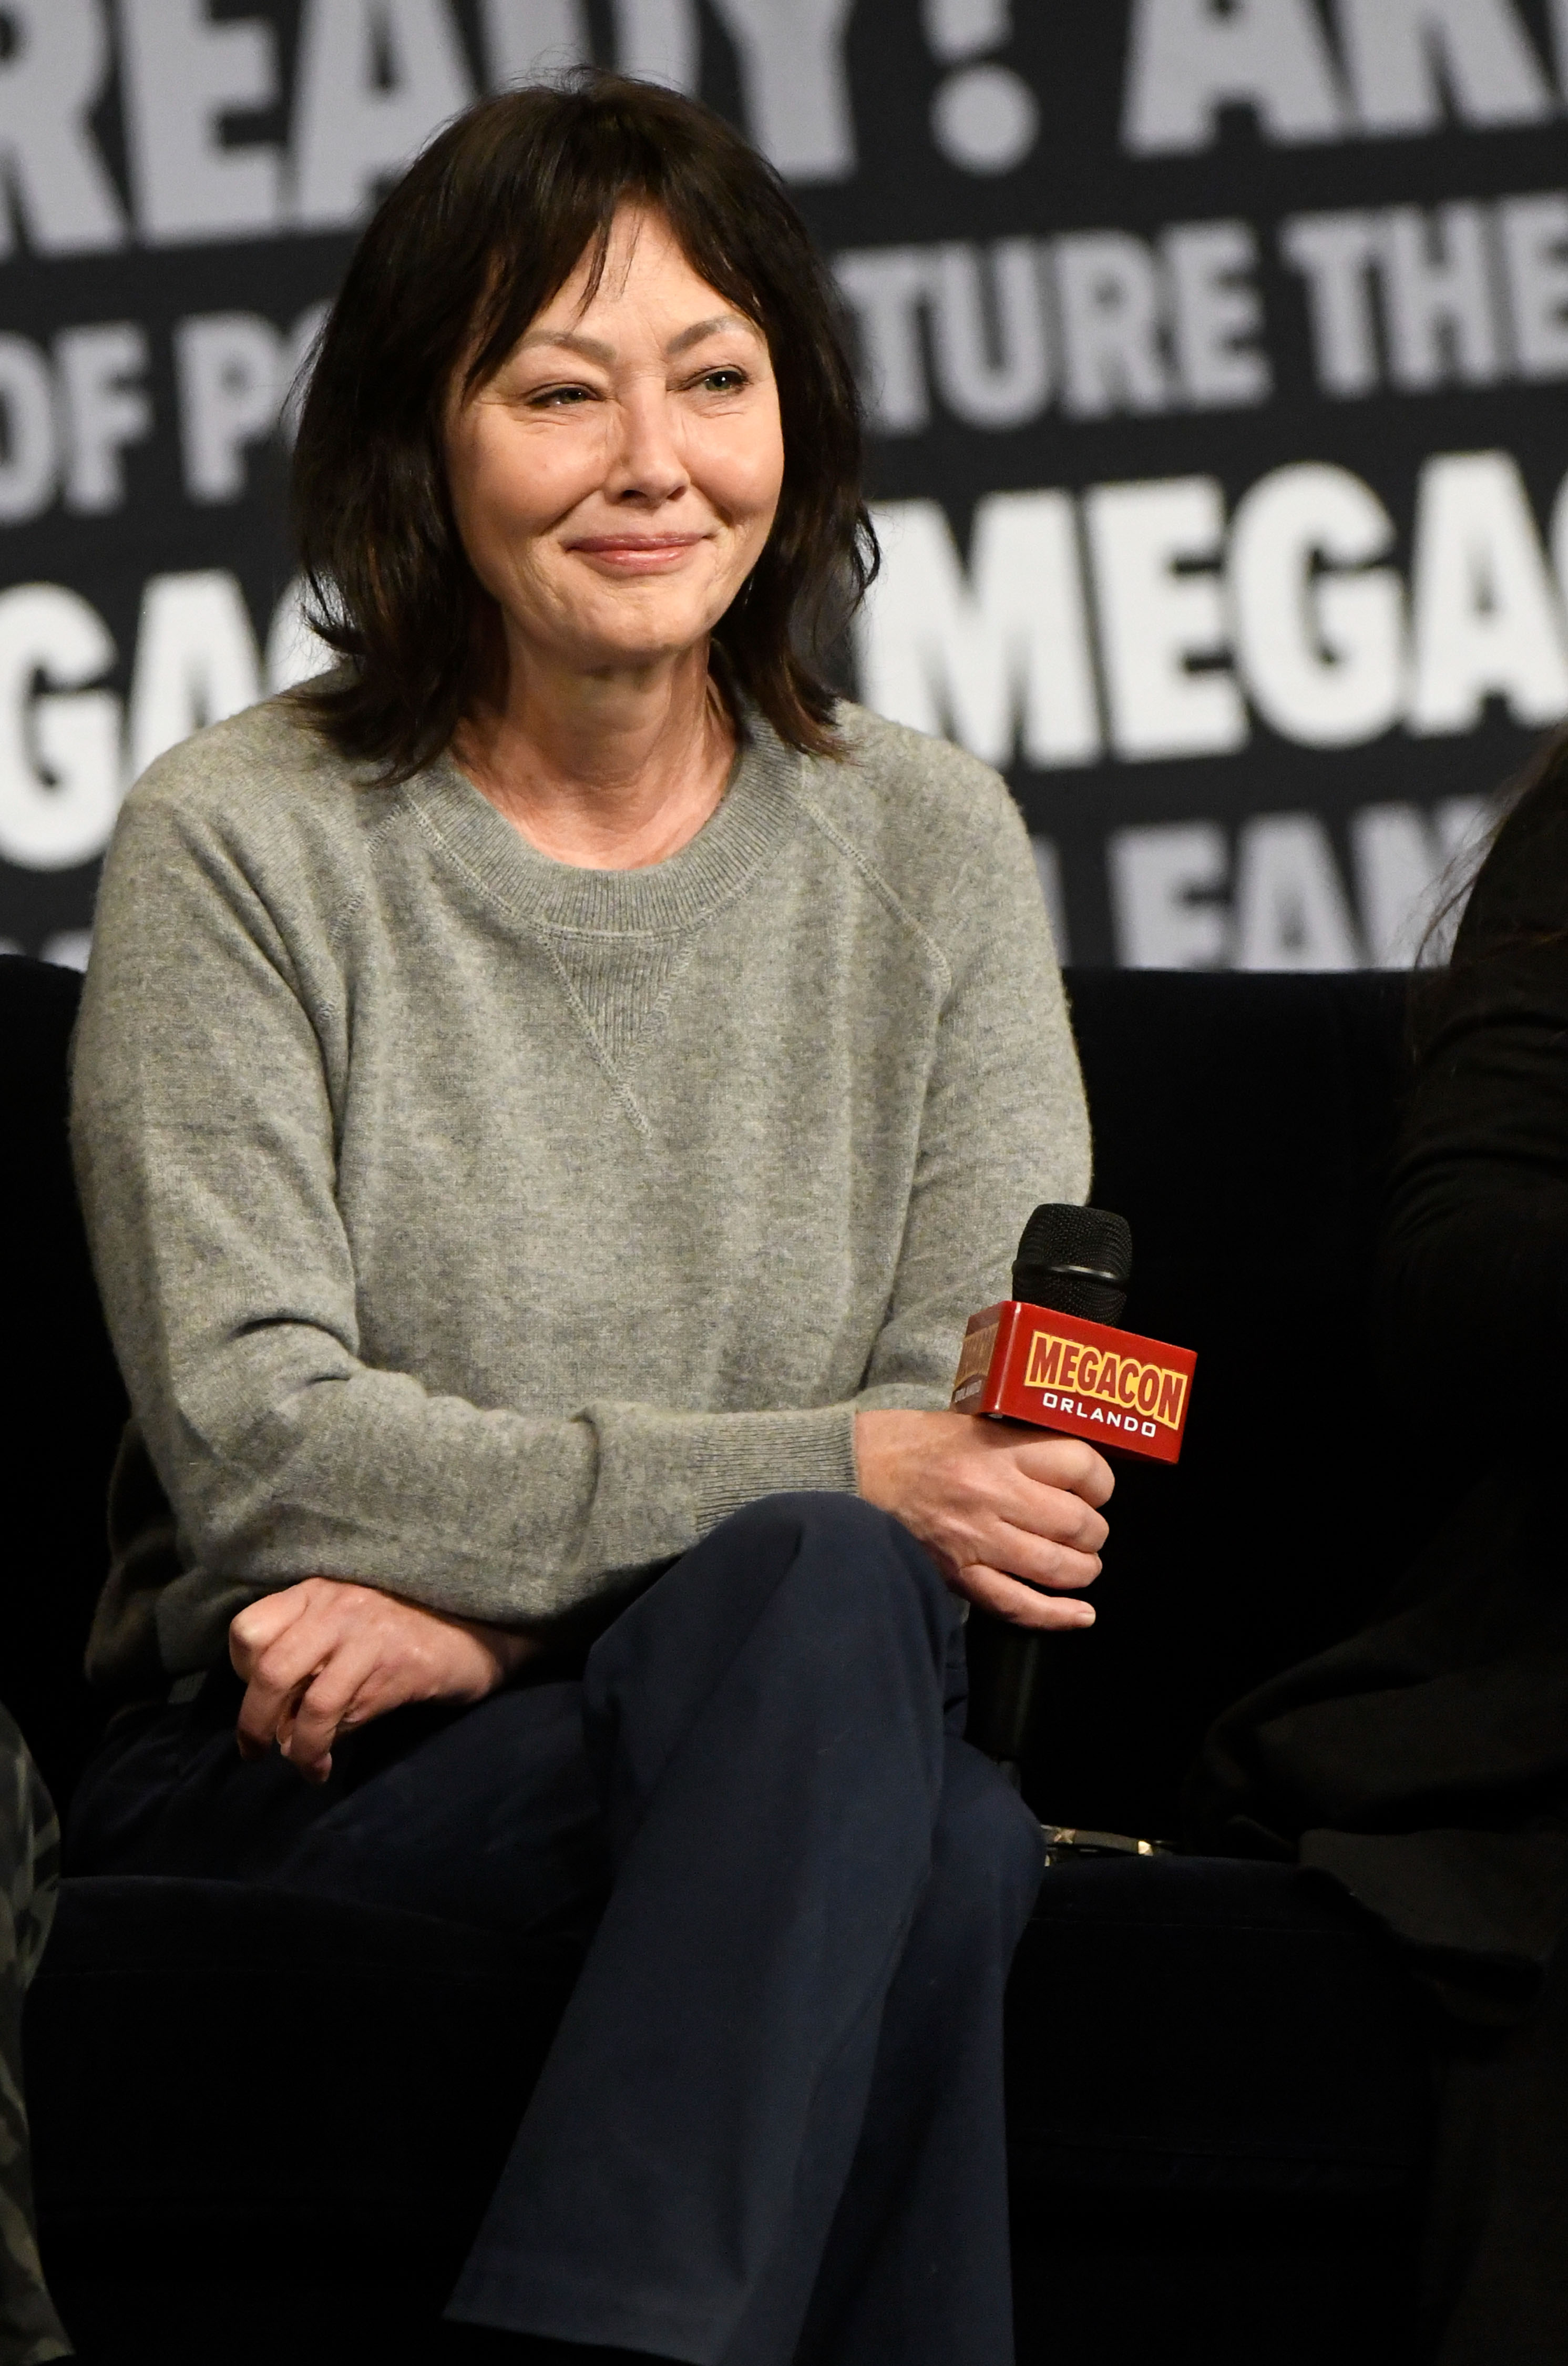 Shannen Doherty speaks during a Q&A session at MegaCon Orlando in Orlando, Florida, on February 4, 2024. | Source: Getty Images